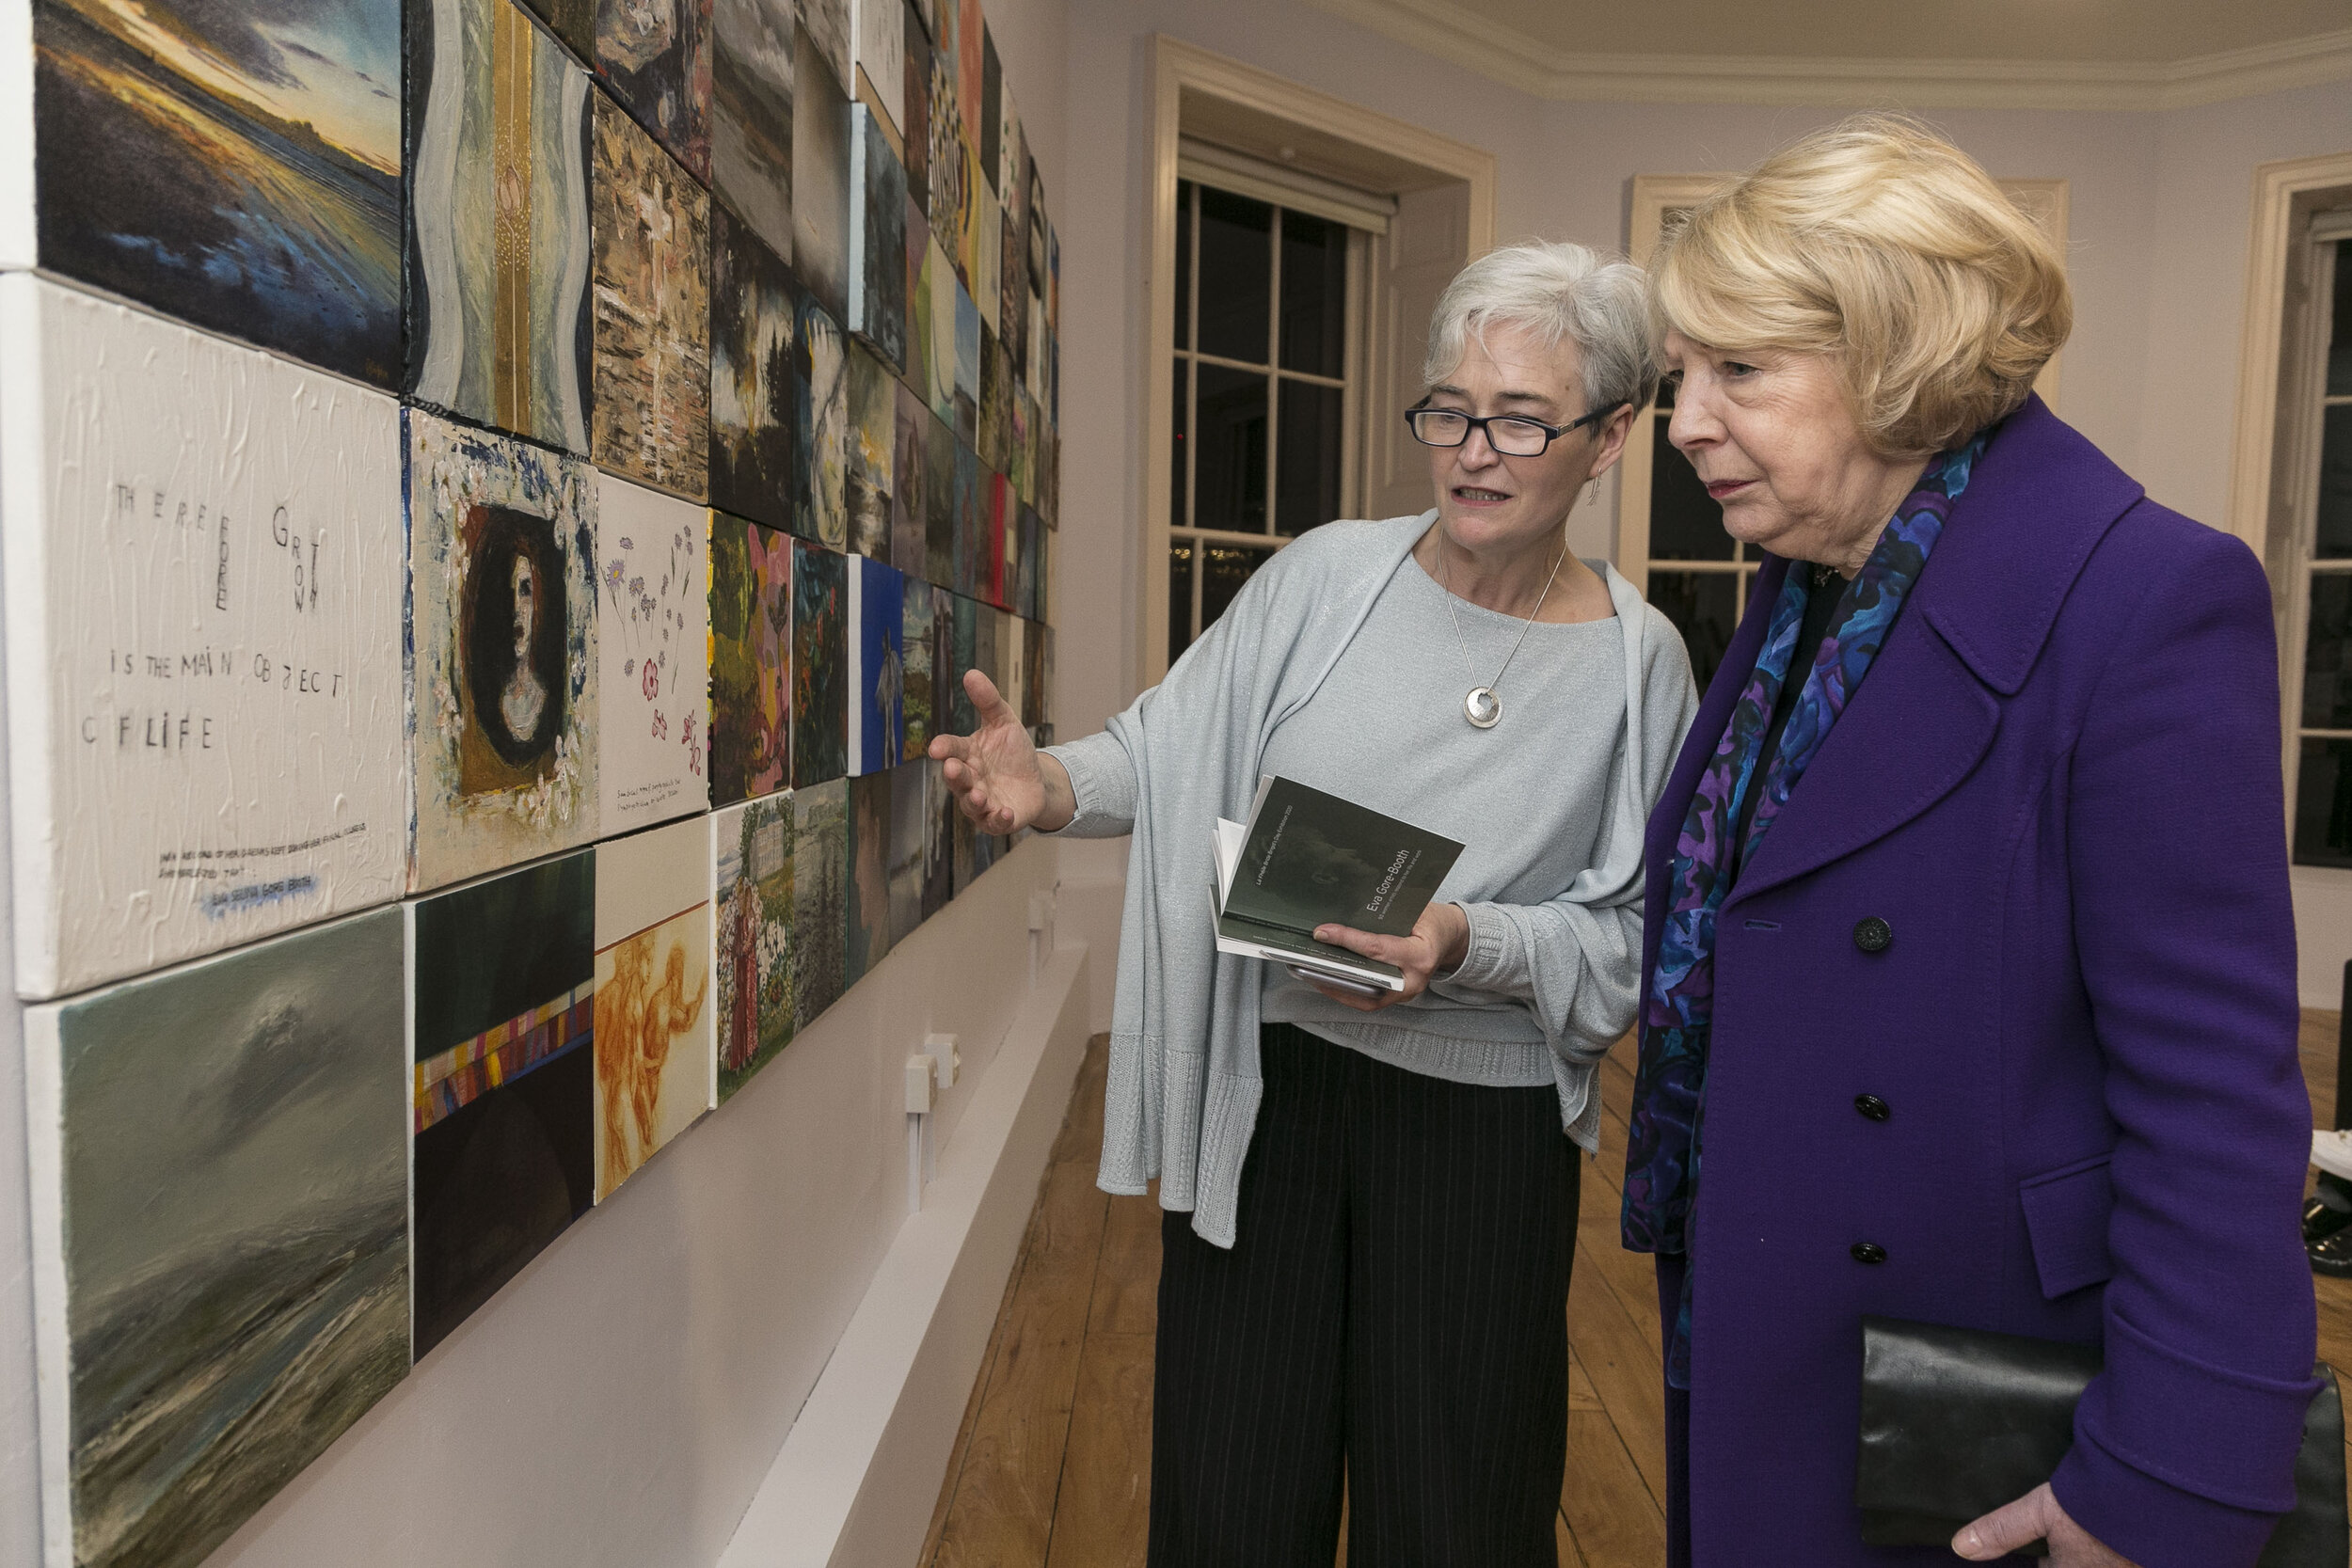  Sabina Higgns with Martina Hamilton discussing the paintings before the opening.   Hamilton Gallery / MoLi / DFAT - exhibition opening by Sabina Higgins of "Eva Gore-Booth 93 Irish women artists respond to her life and work", part of Brigids Day Lá 